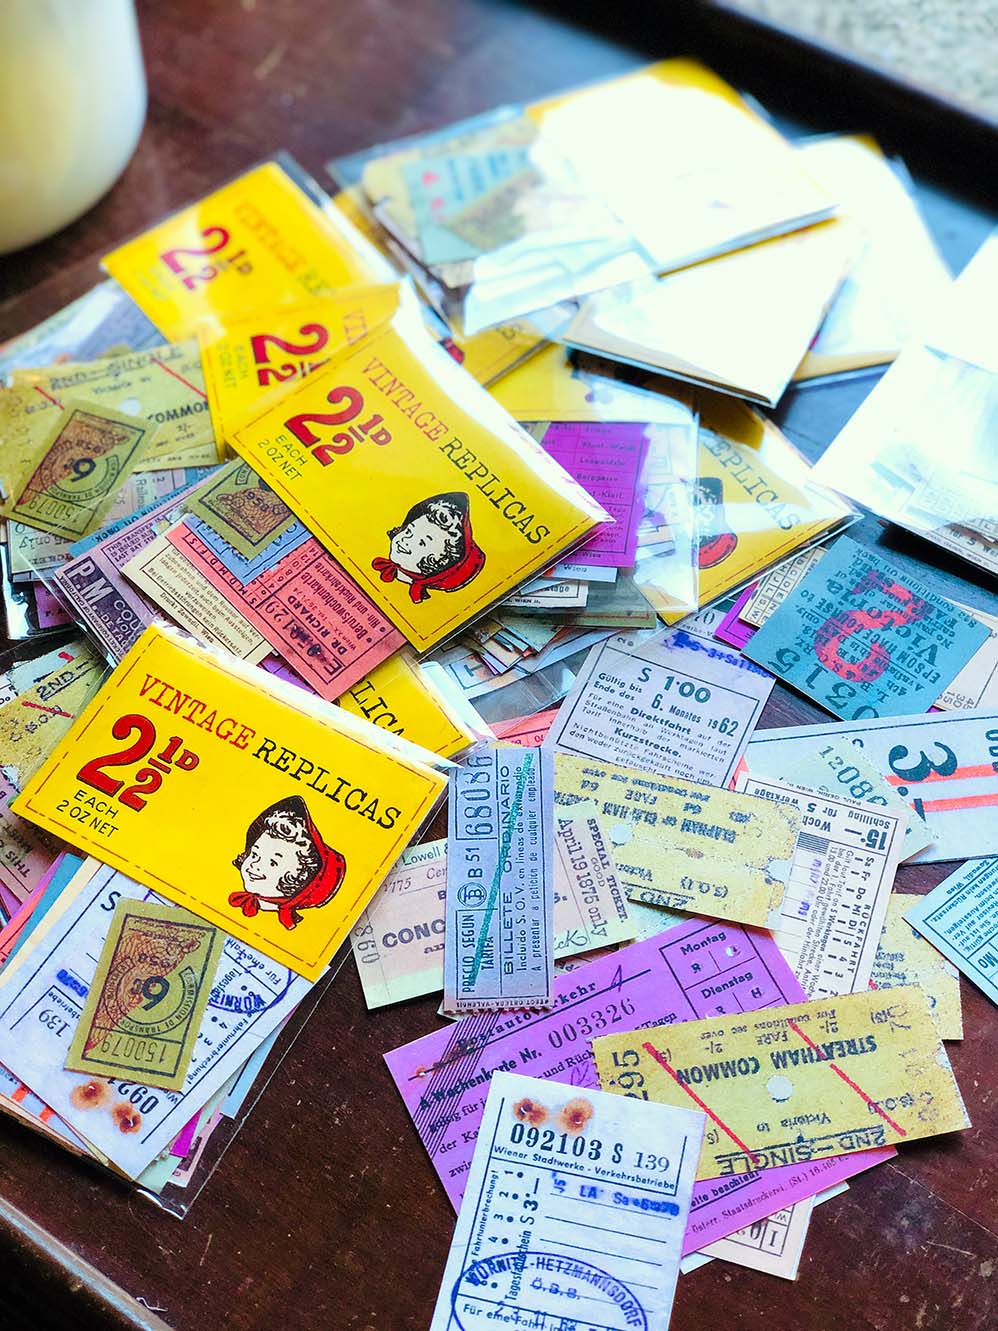 Vintage Ticket Replicas Vol. 1 (古いチケット翻刻) from micmoc.com at Mic Moc